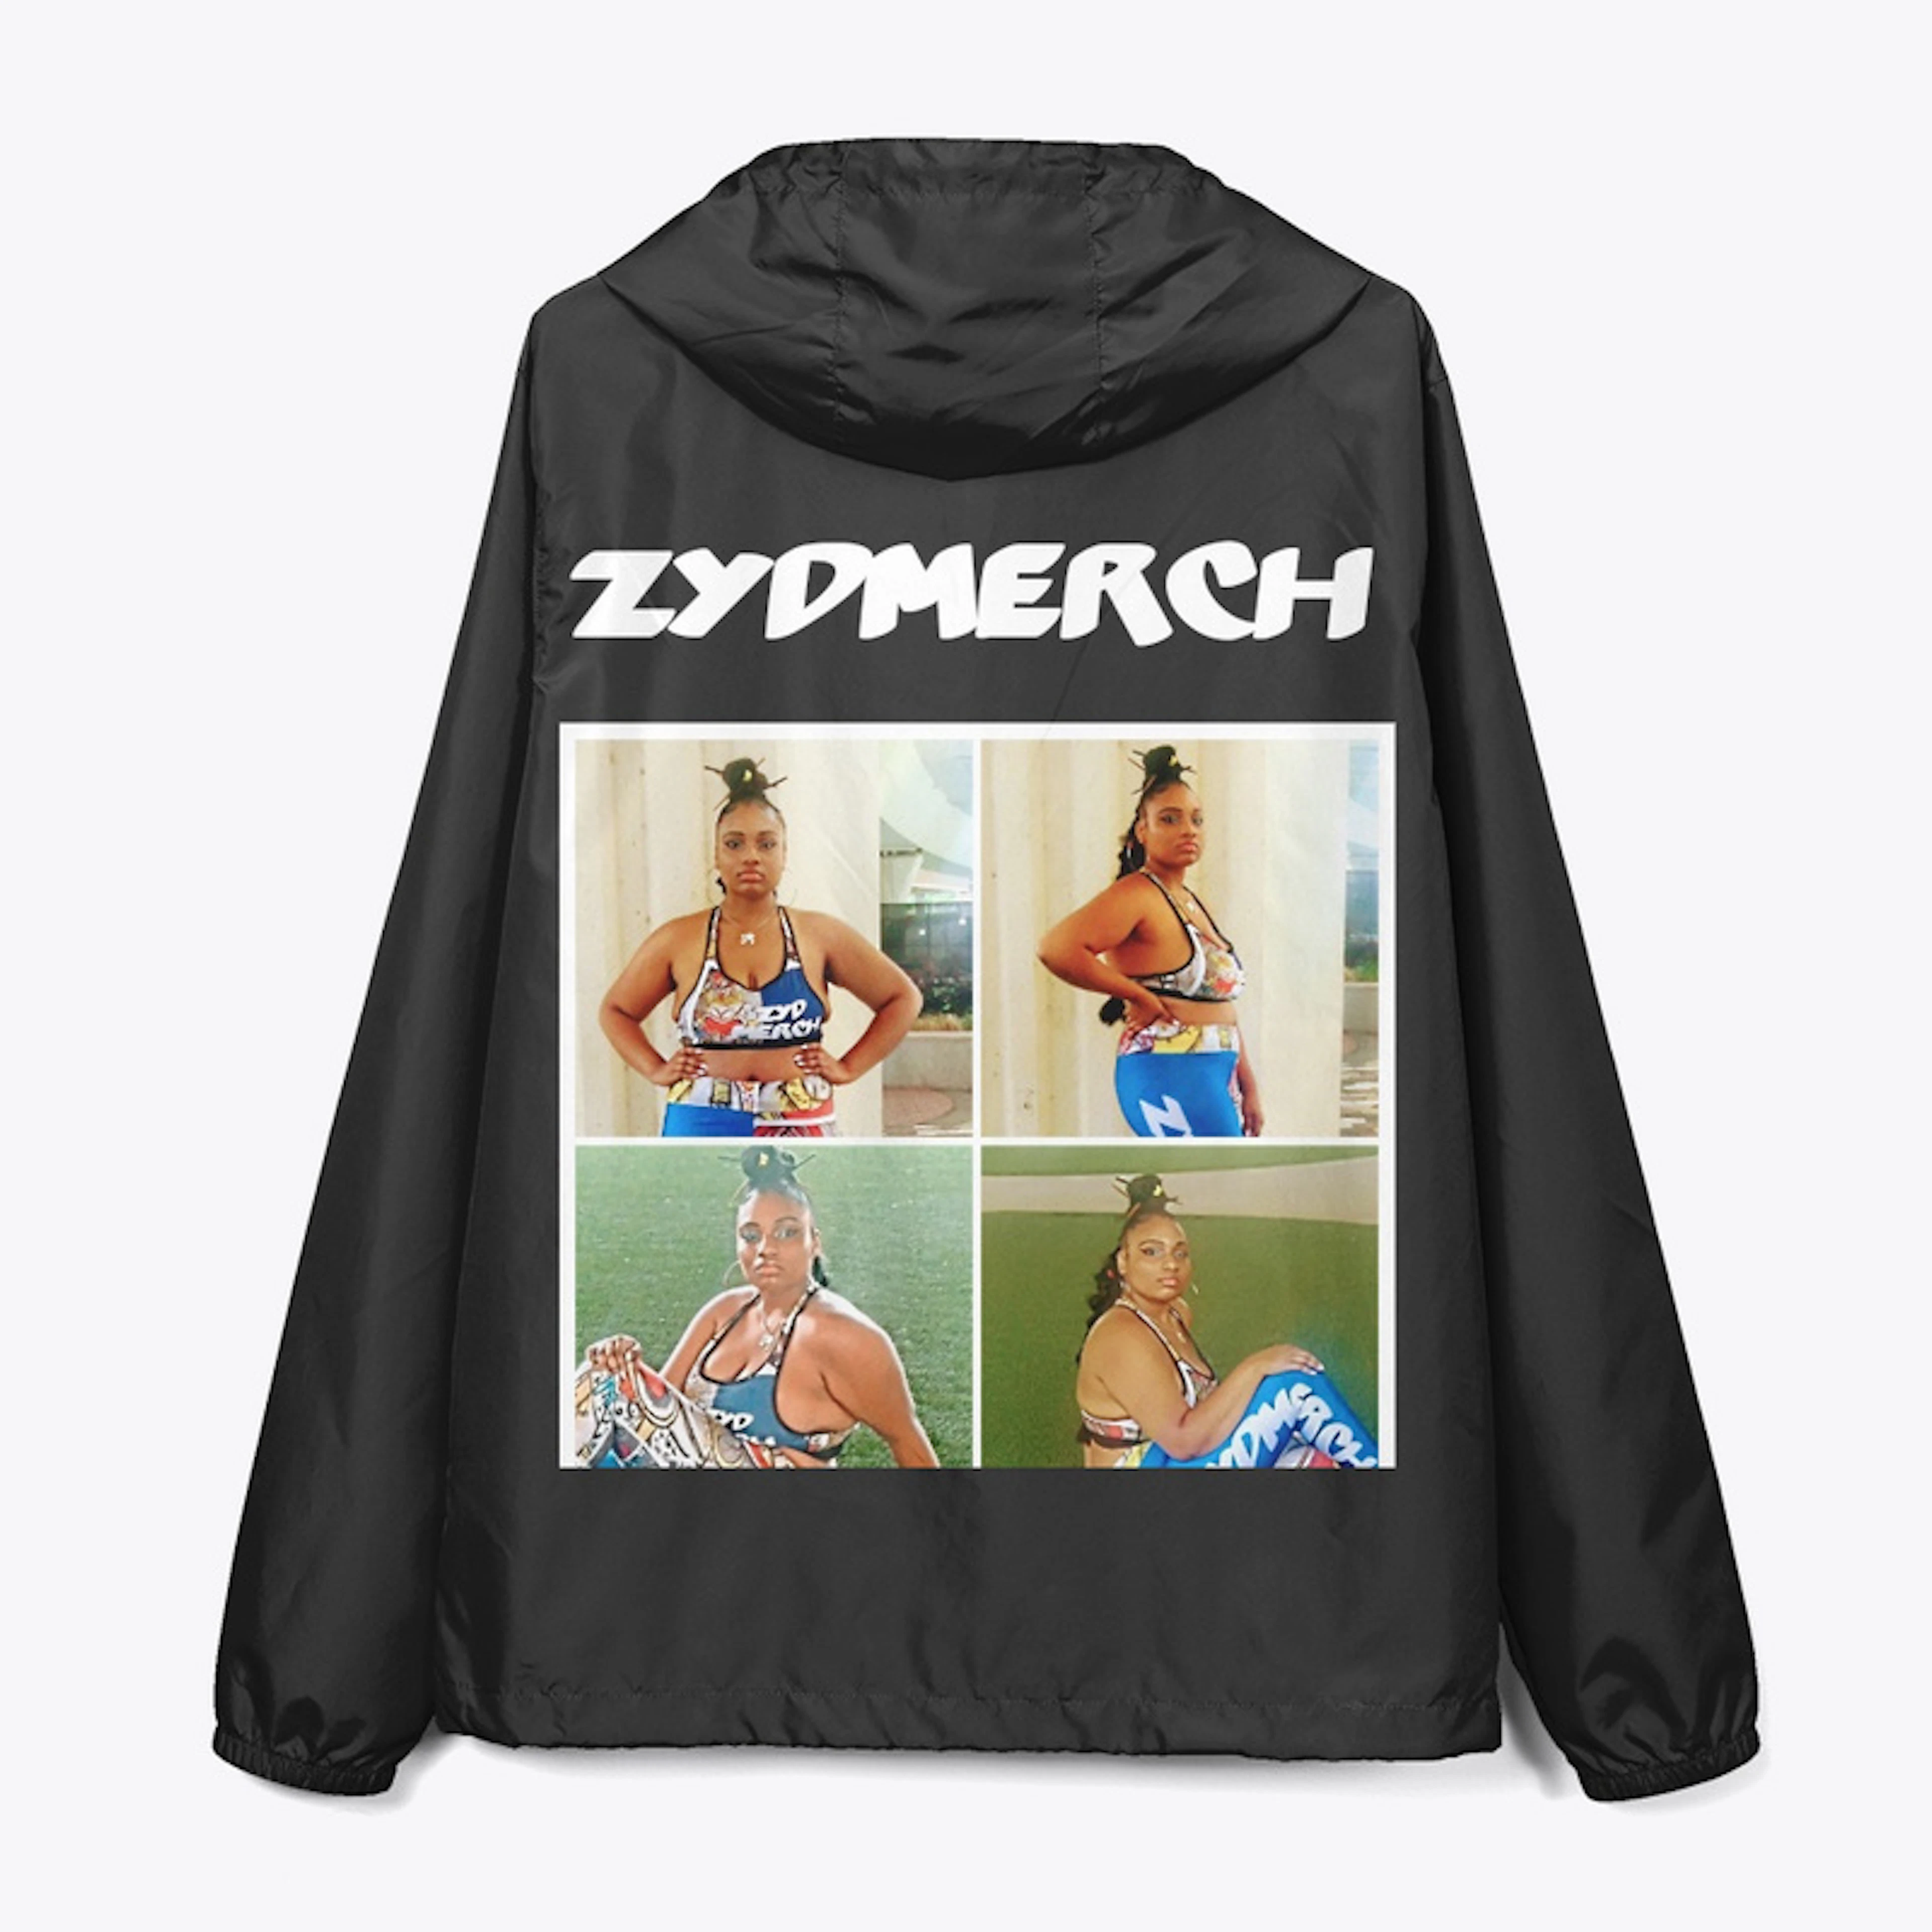 ZYDMERCH "Meet The Owner" COLLECTION 